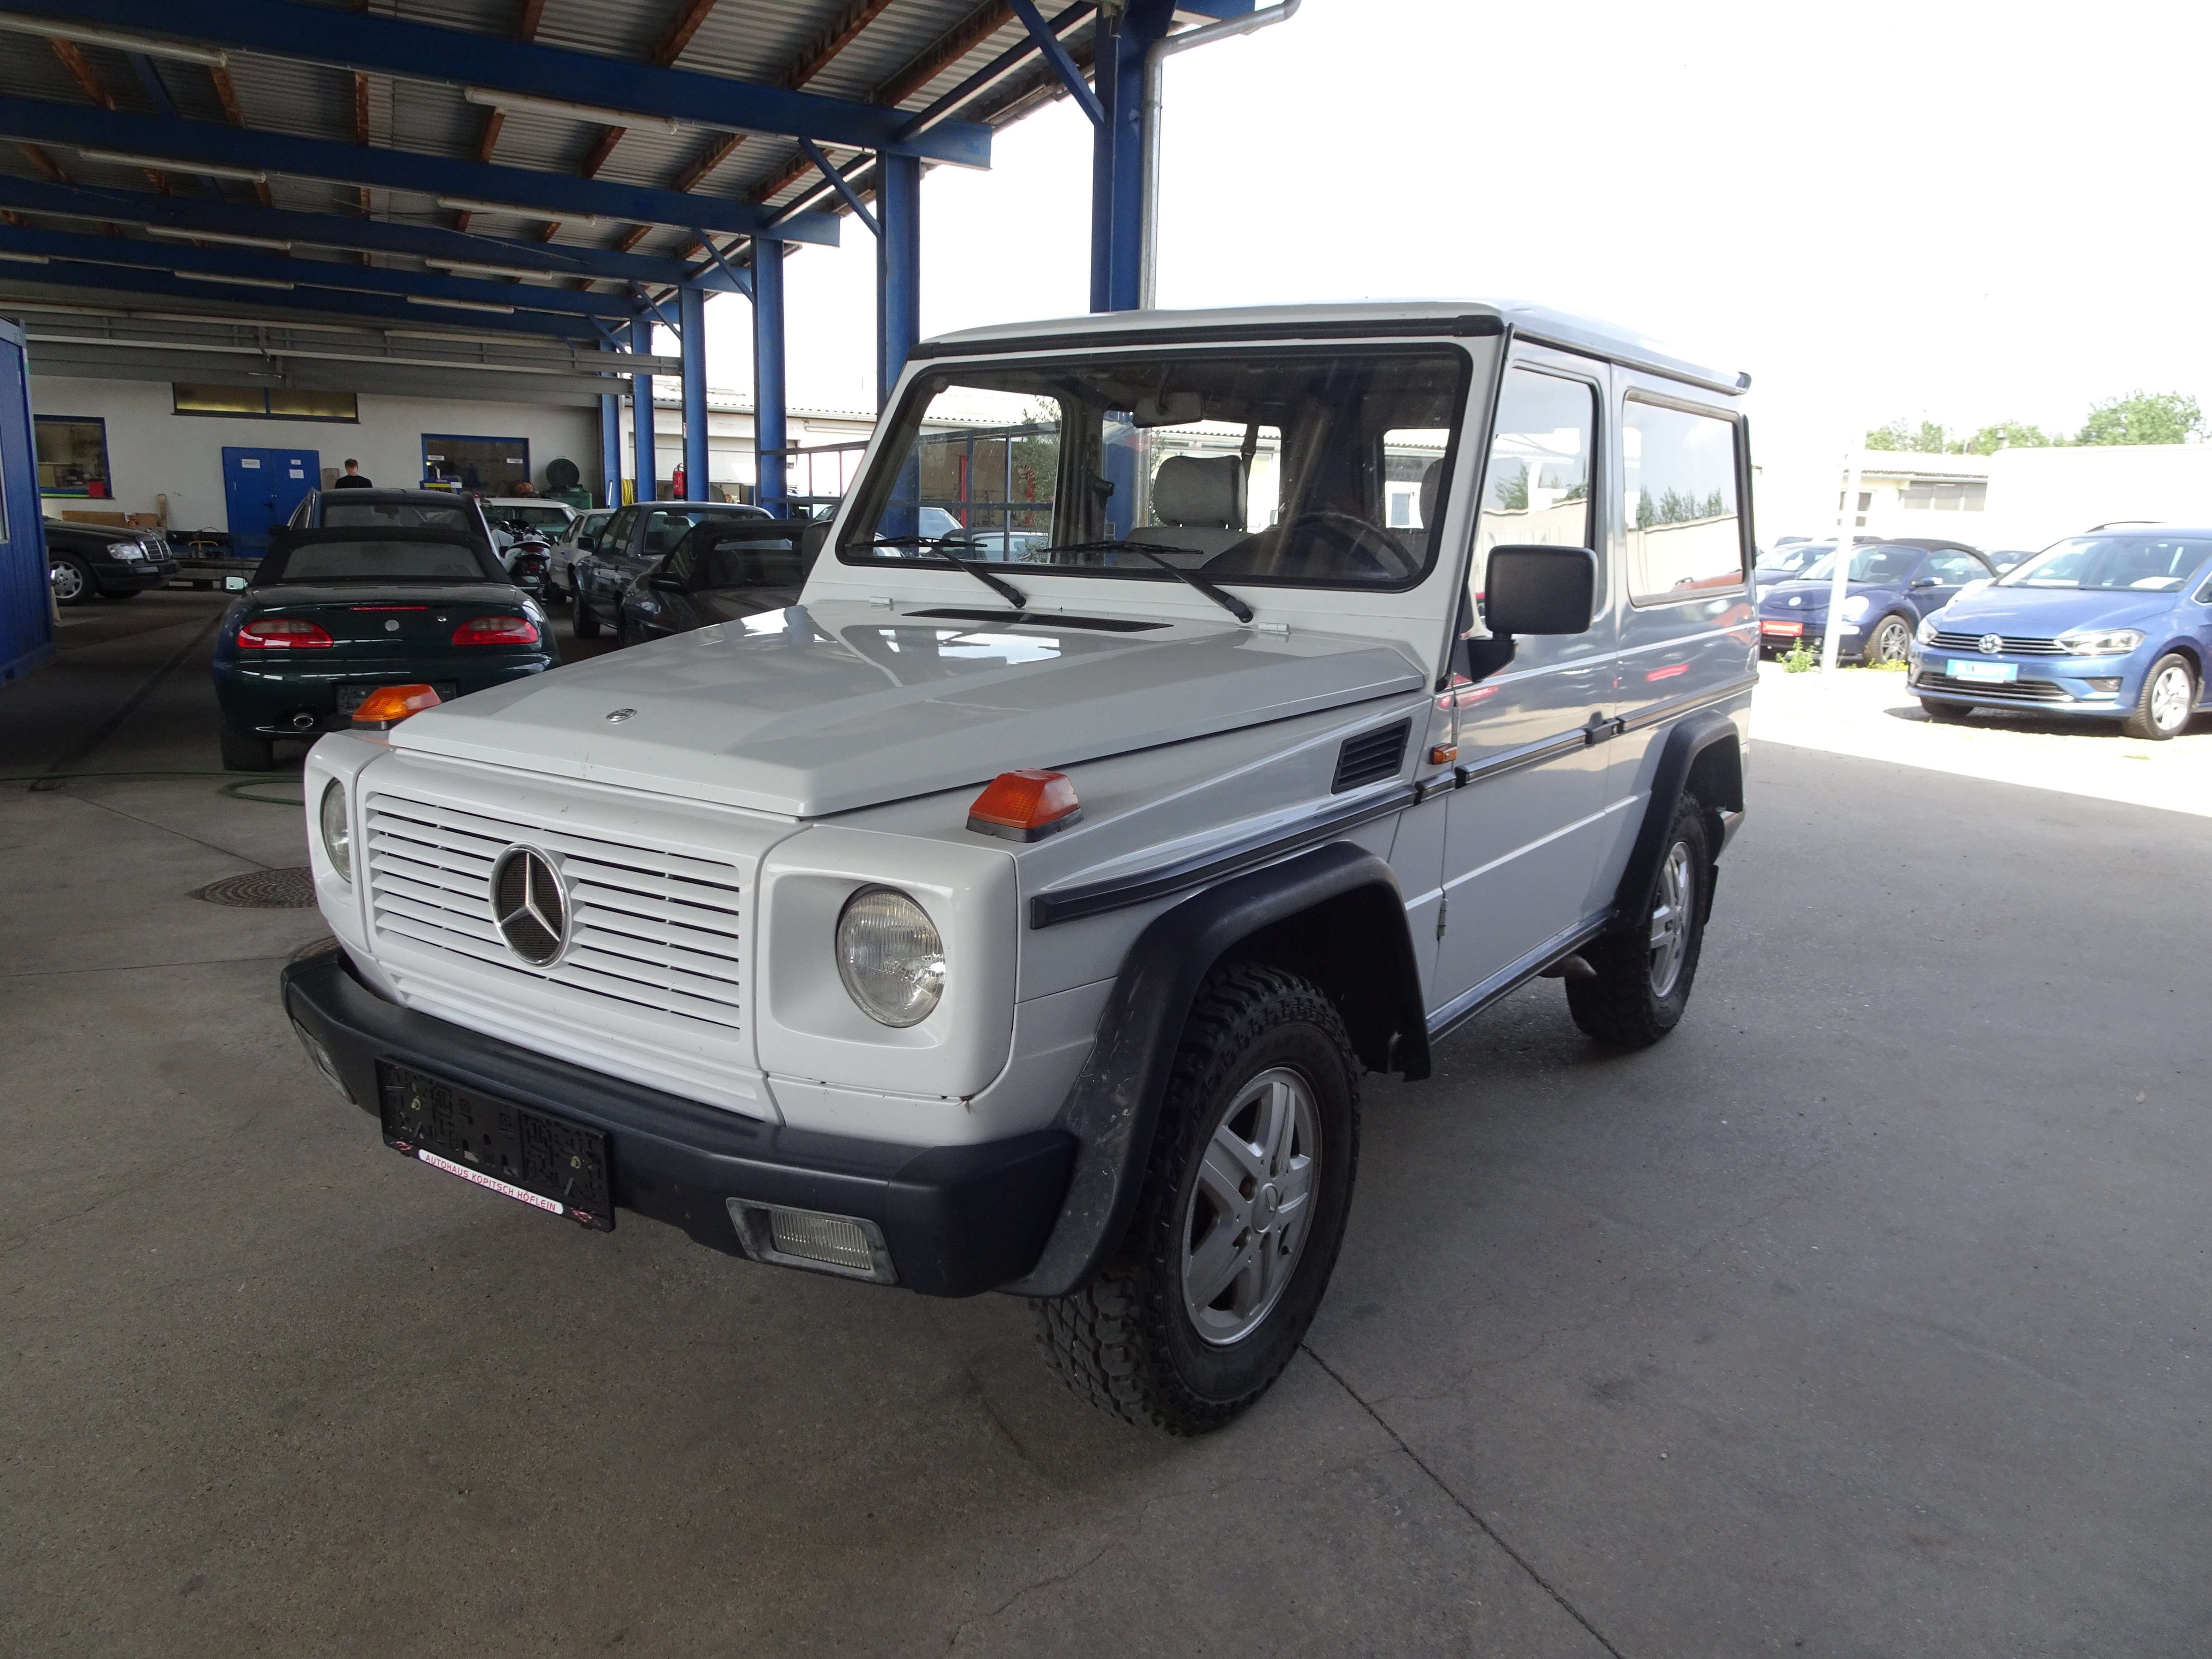 Puch G Off-Road/Pick-up in White used in Höflein for € 25,000.-